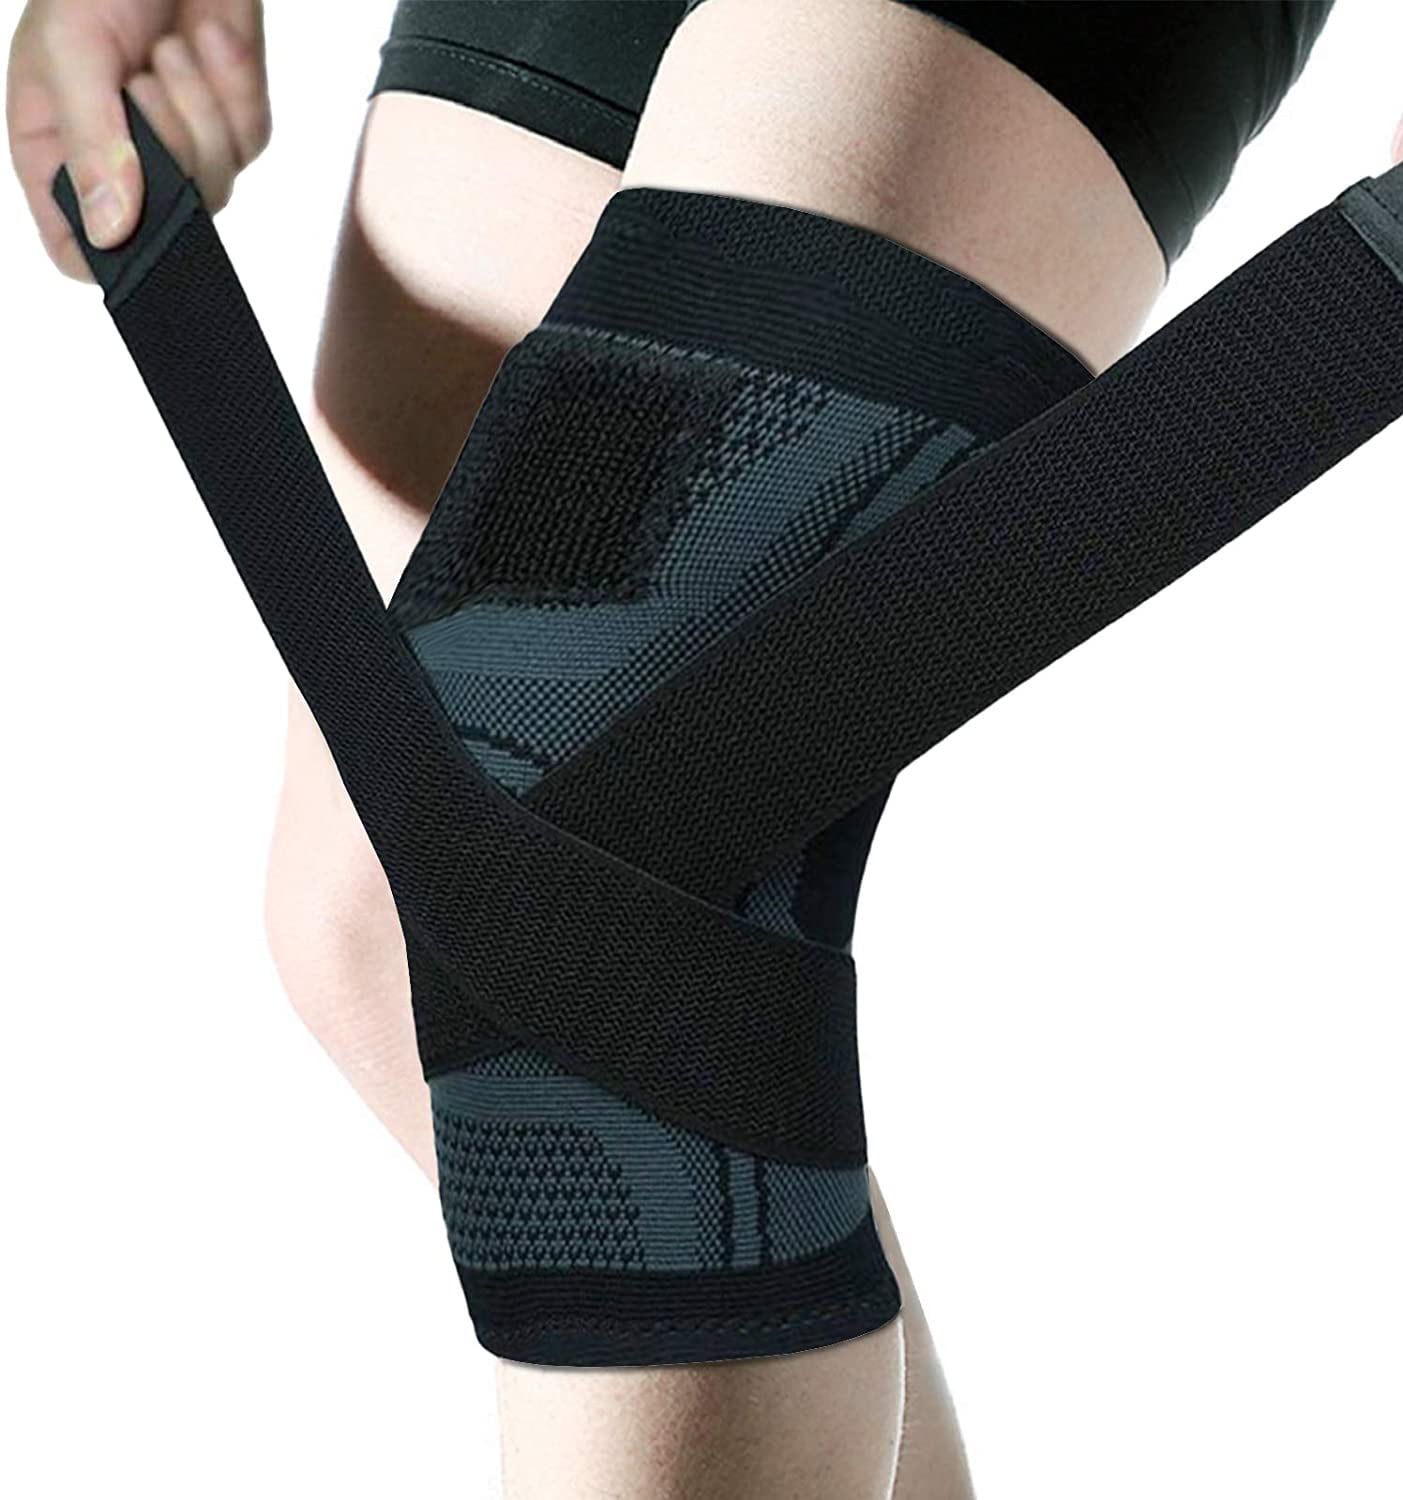 Professional Compression Knee Brace Support Protector For Arthritis Relief,  Joint Pain, Acl, Mcl, Meniscus Tear, Post Surgery